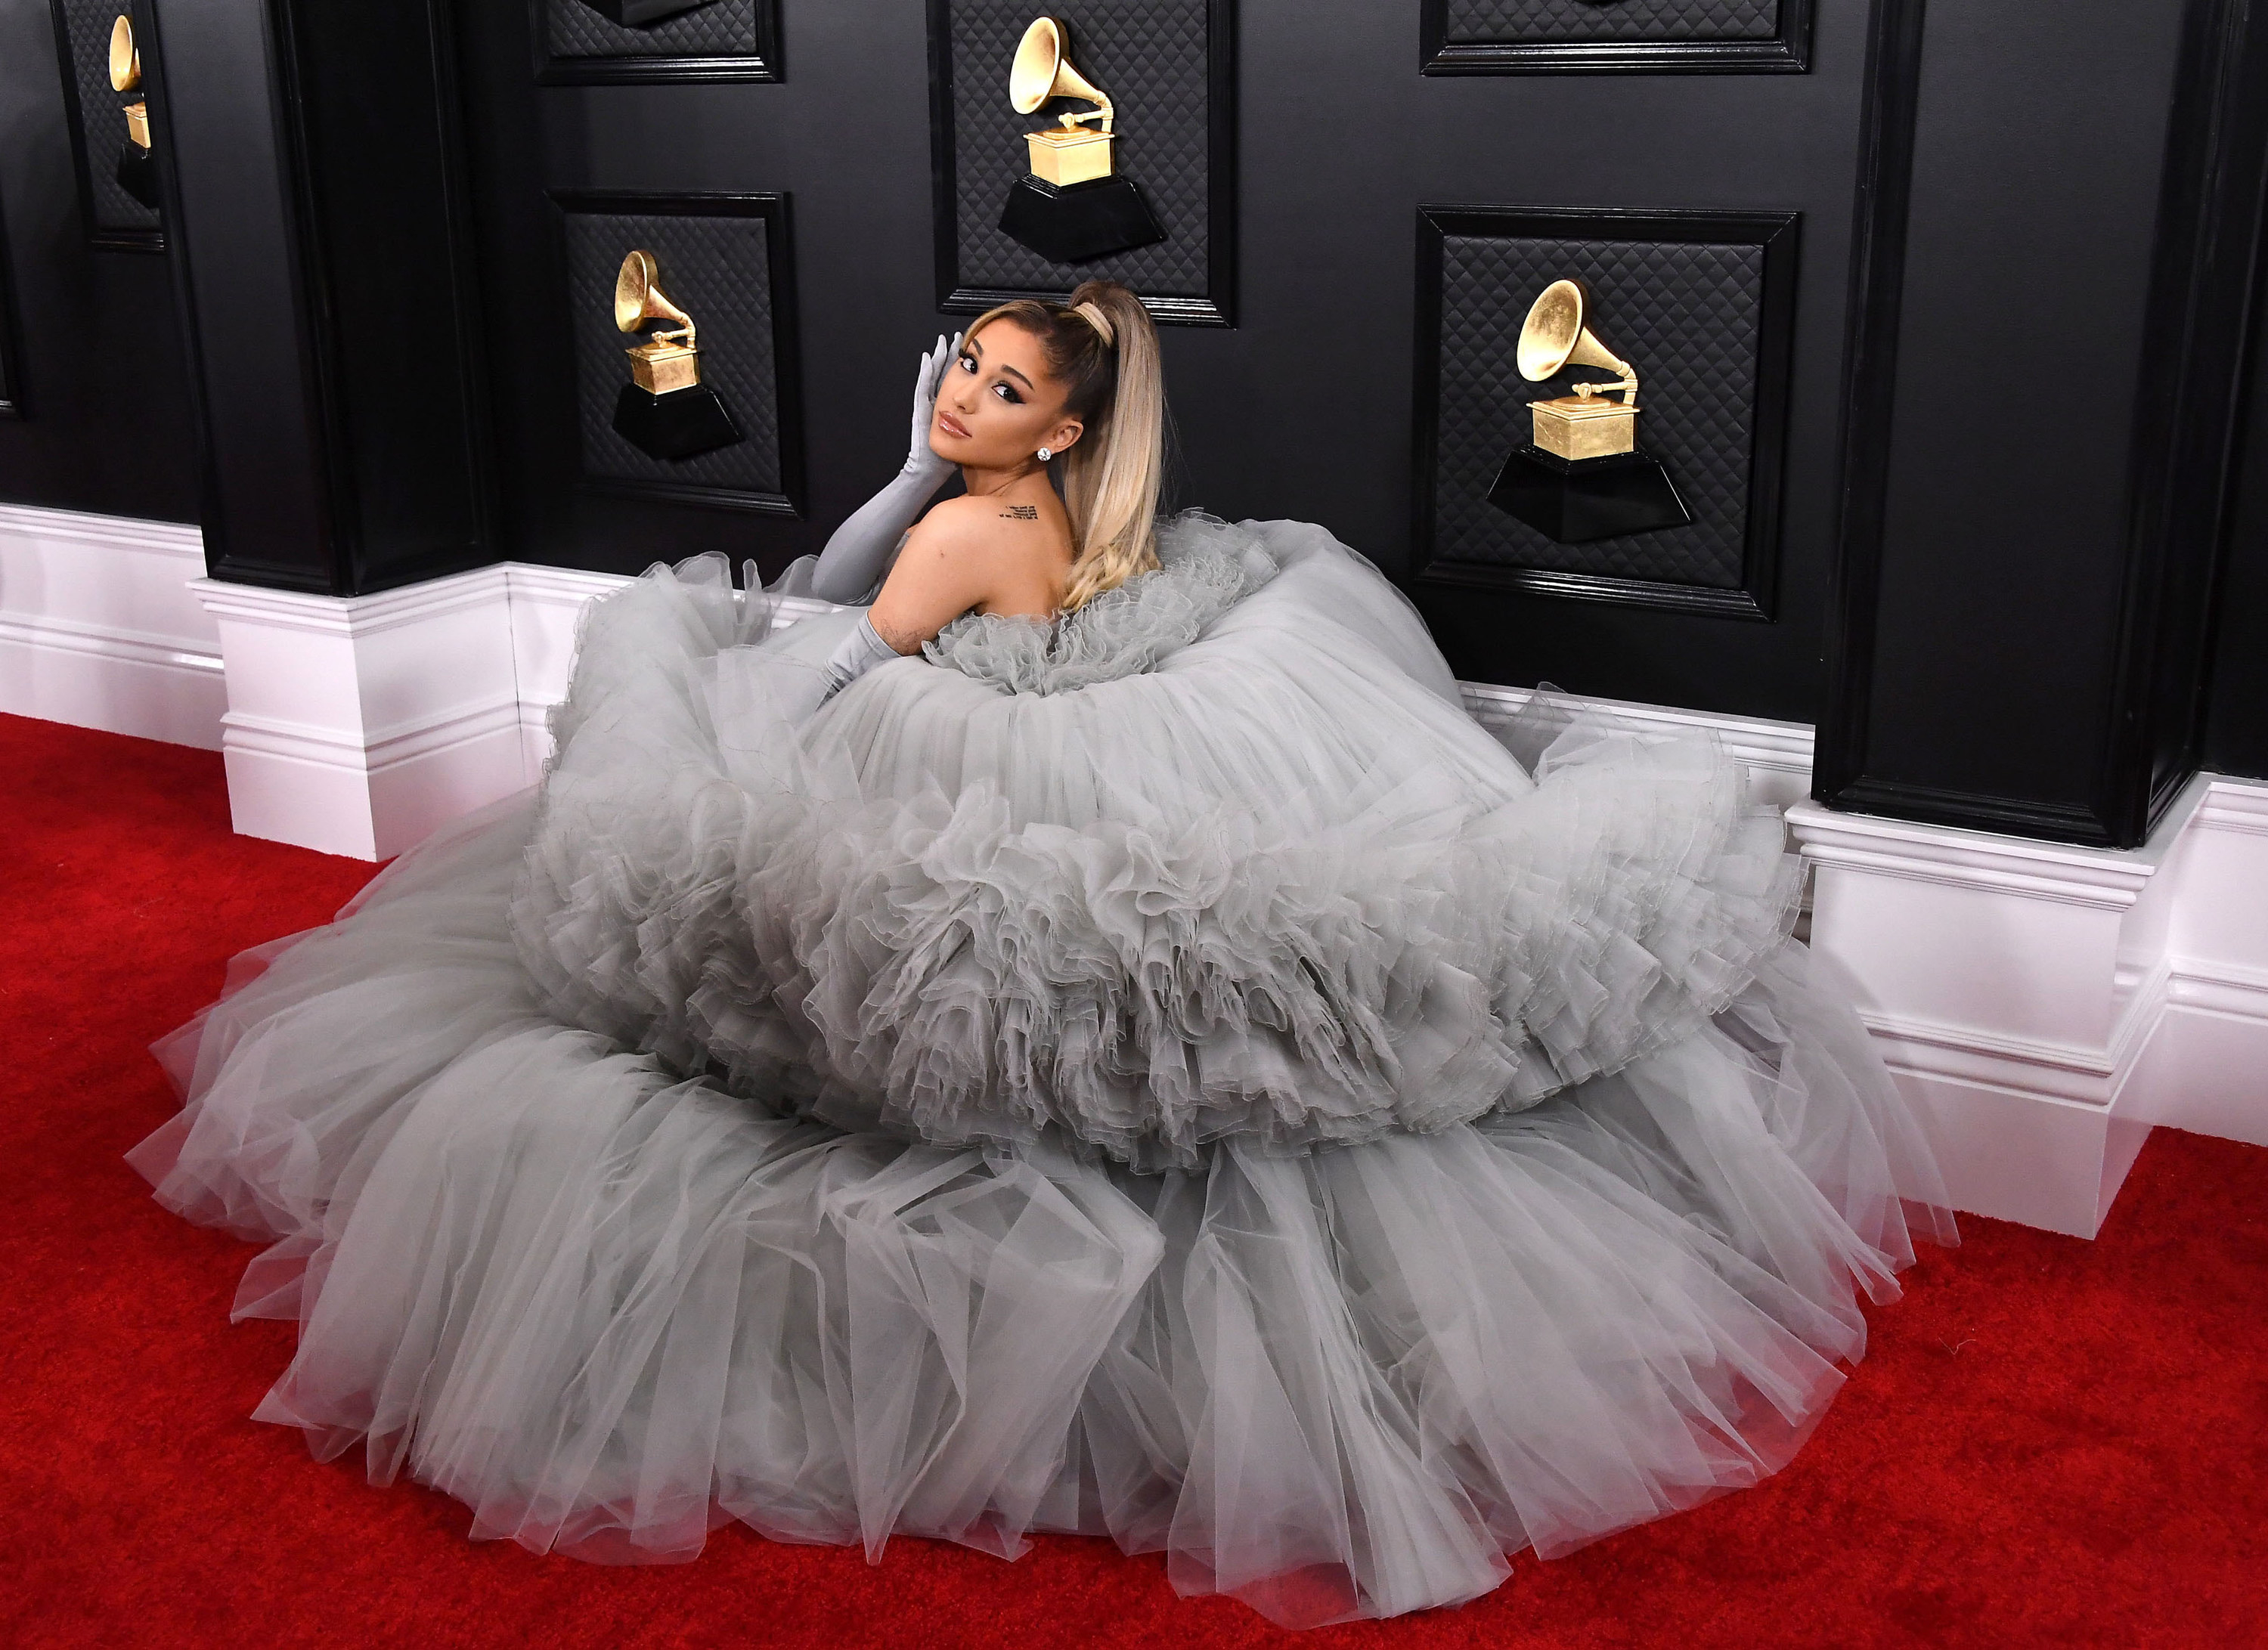 Ariana Grande attends the 62nd Annual GRAMMY Awards at Staples Center on January 26, 2020 in Los Angeles, California